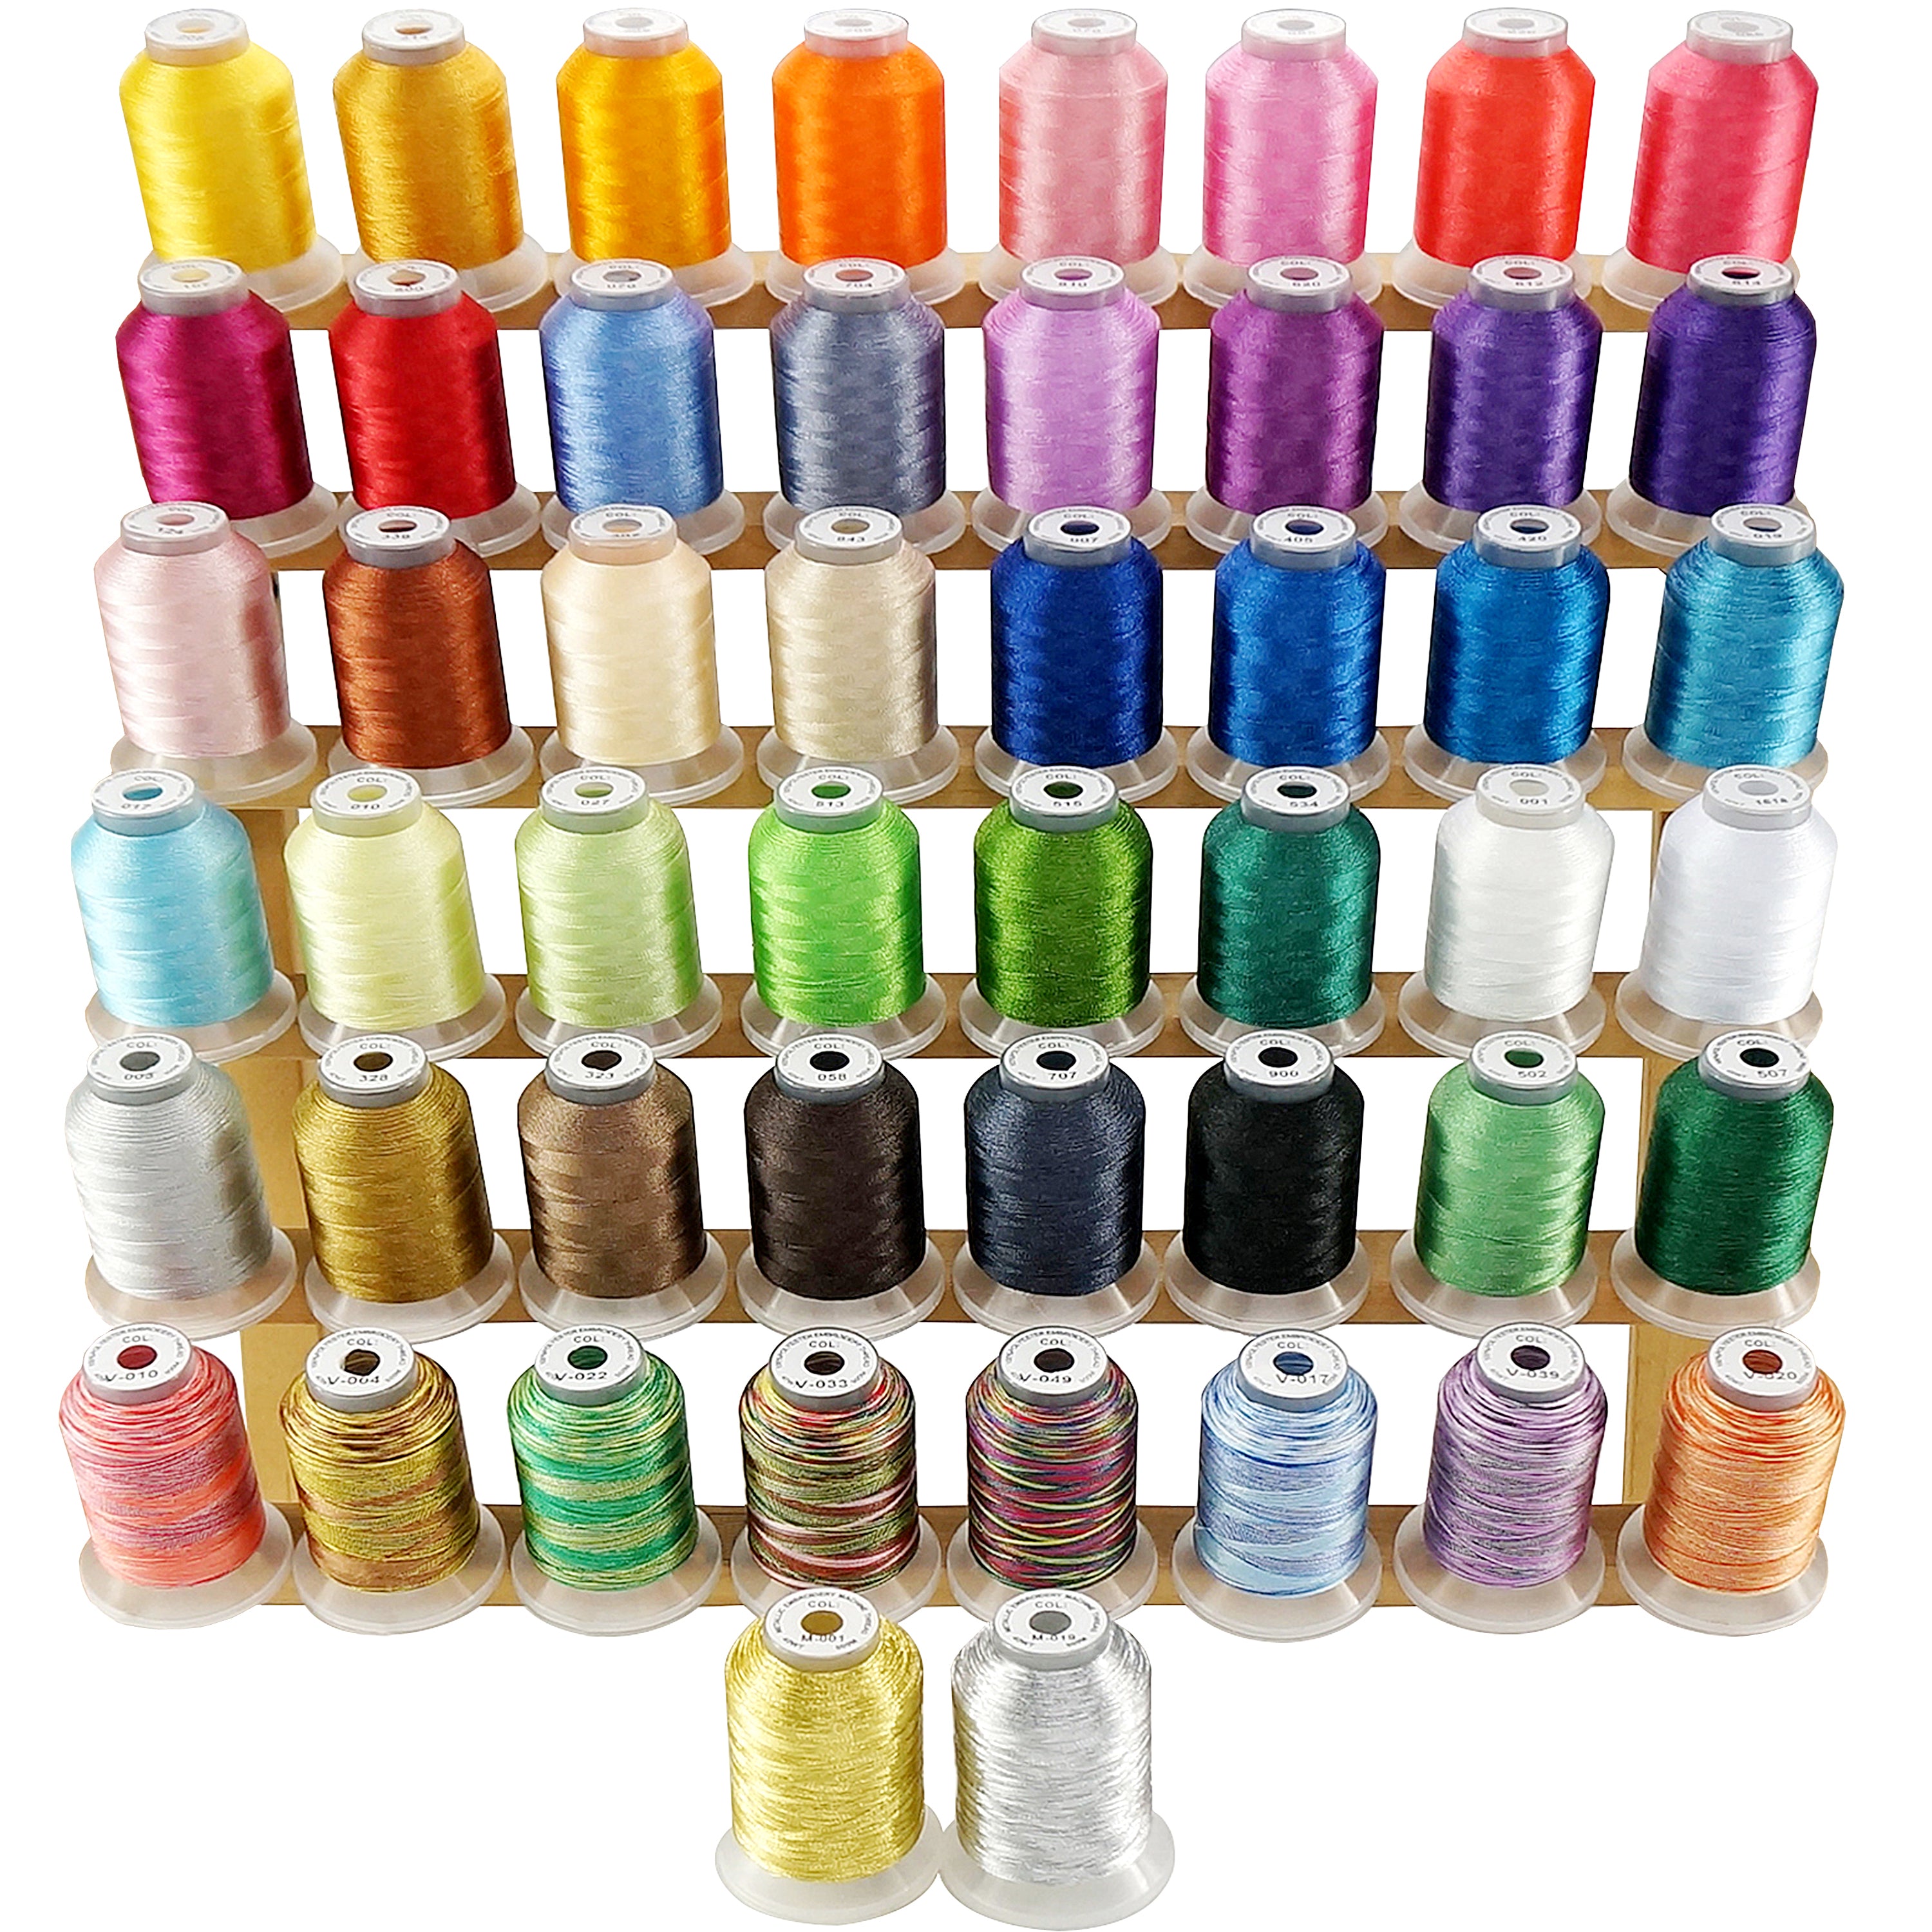  New brothread 40 Brother Colors 500m Each Embroidery Machine  Thread with Clear Plastic Storage Box for Embroidery Sewing Machine : Arts,  Crafts & Sewing